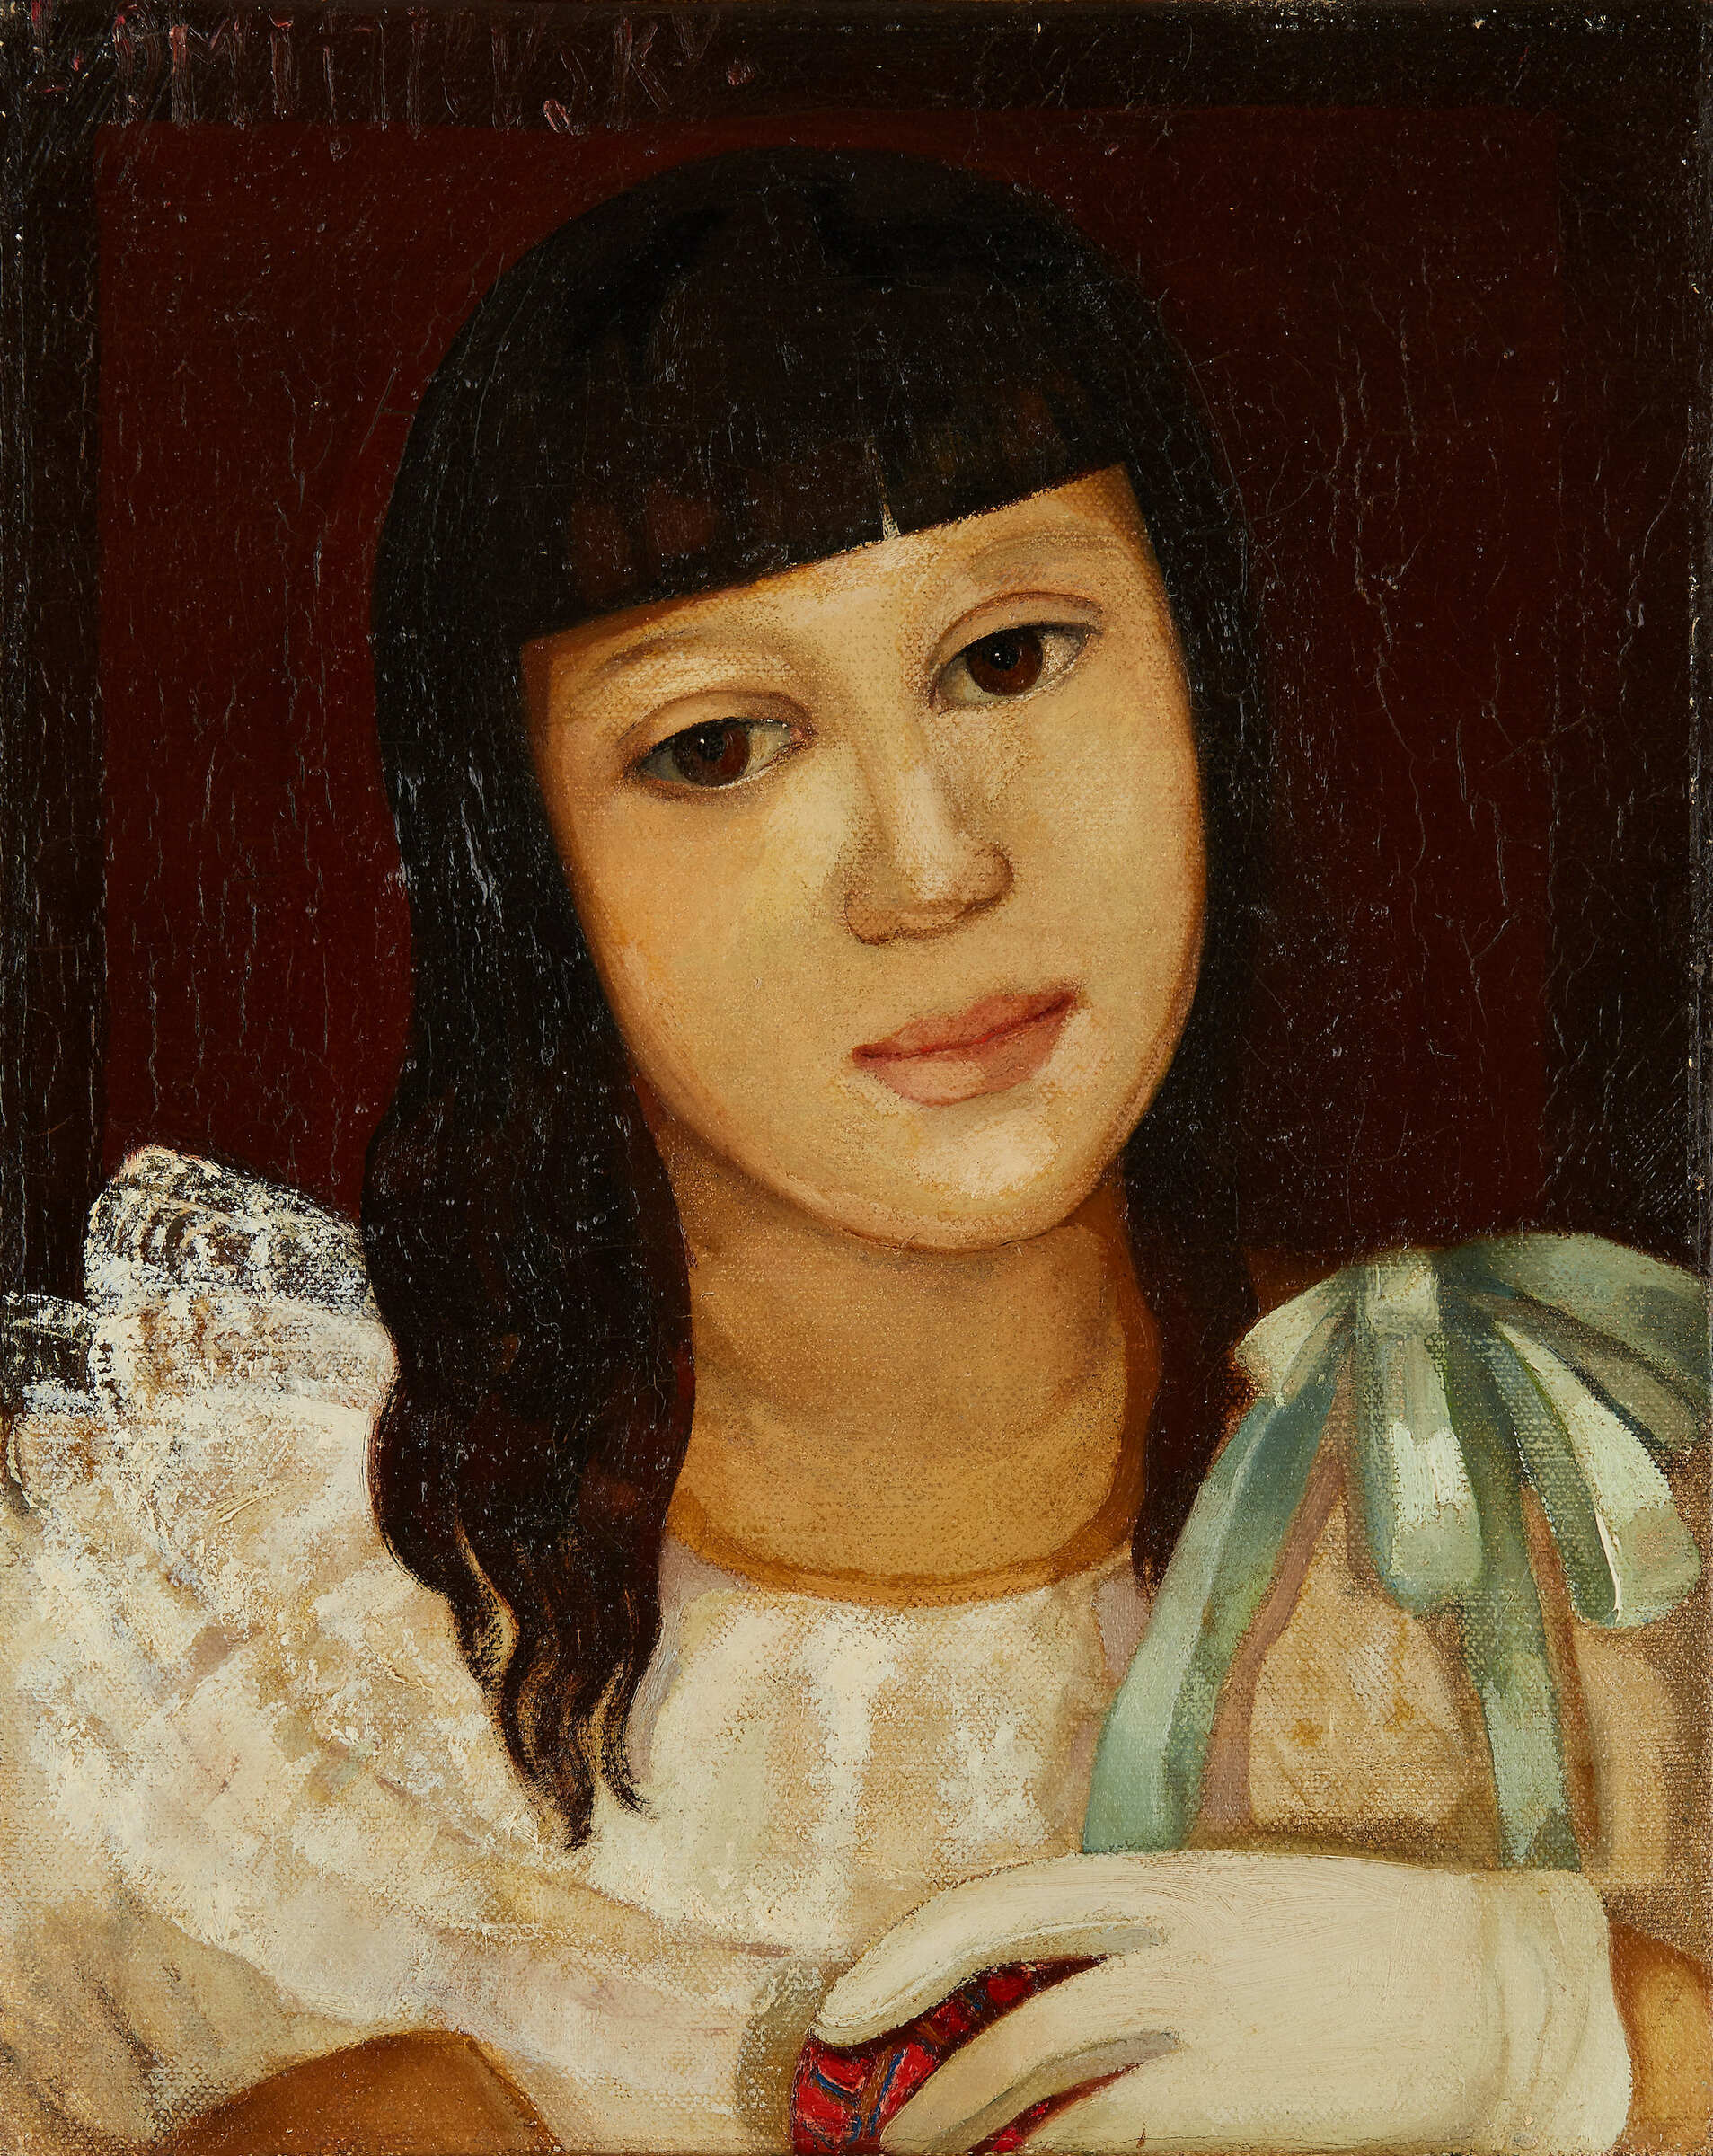 Portrait of a Young Girl with a Red Ball